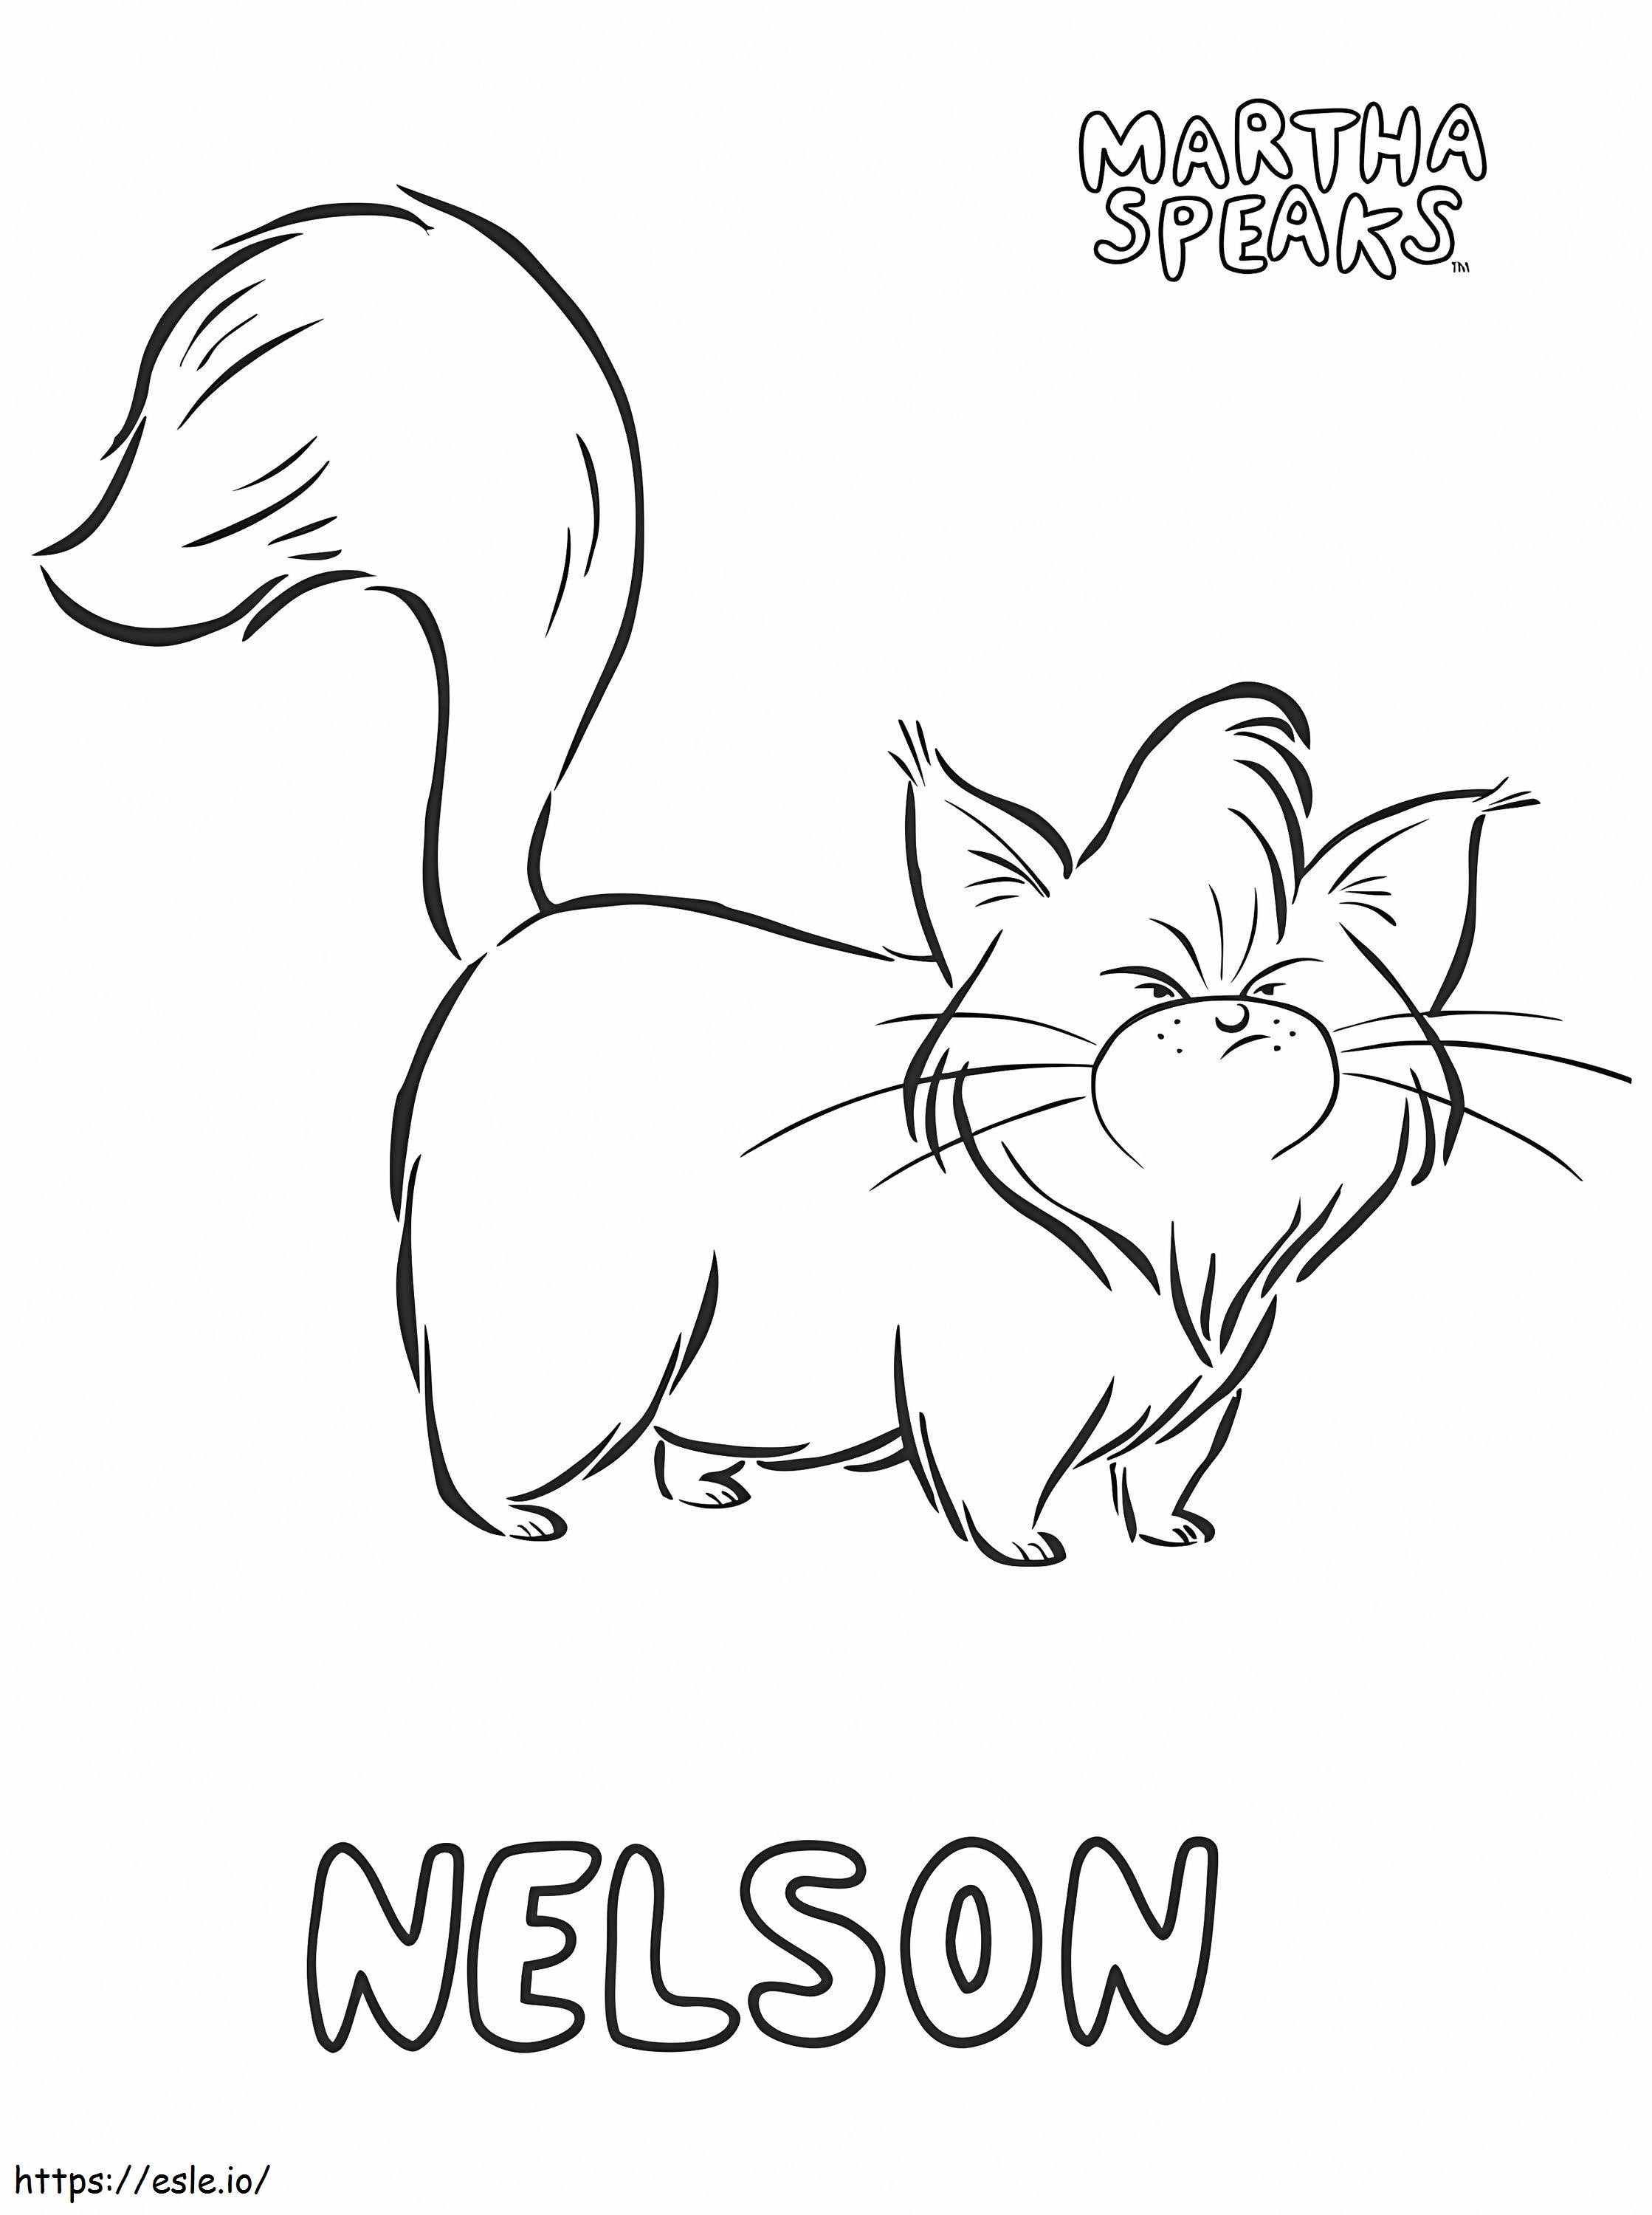 Nelson Cp coloring page